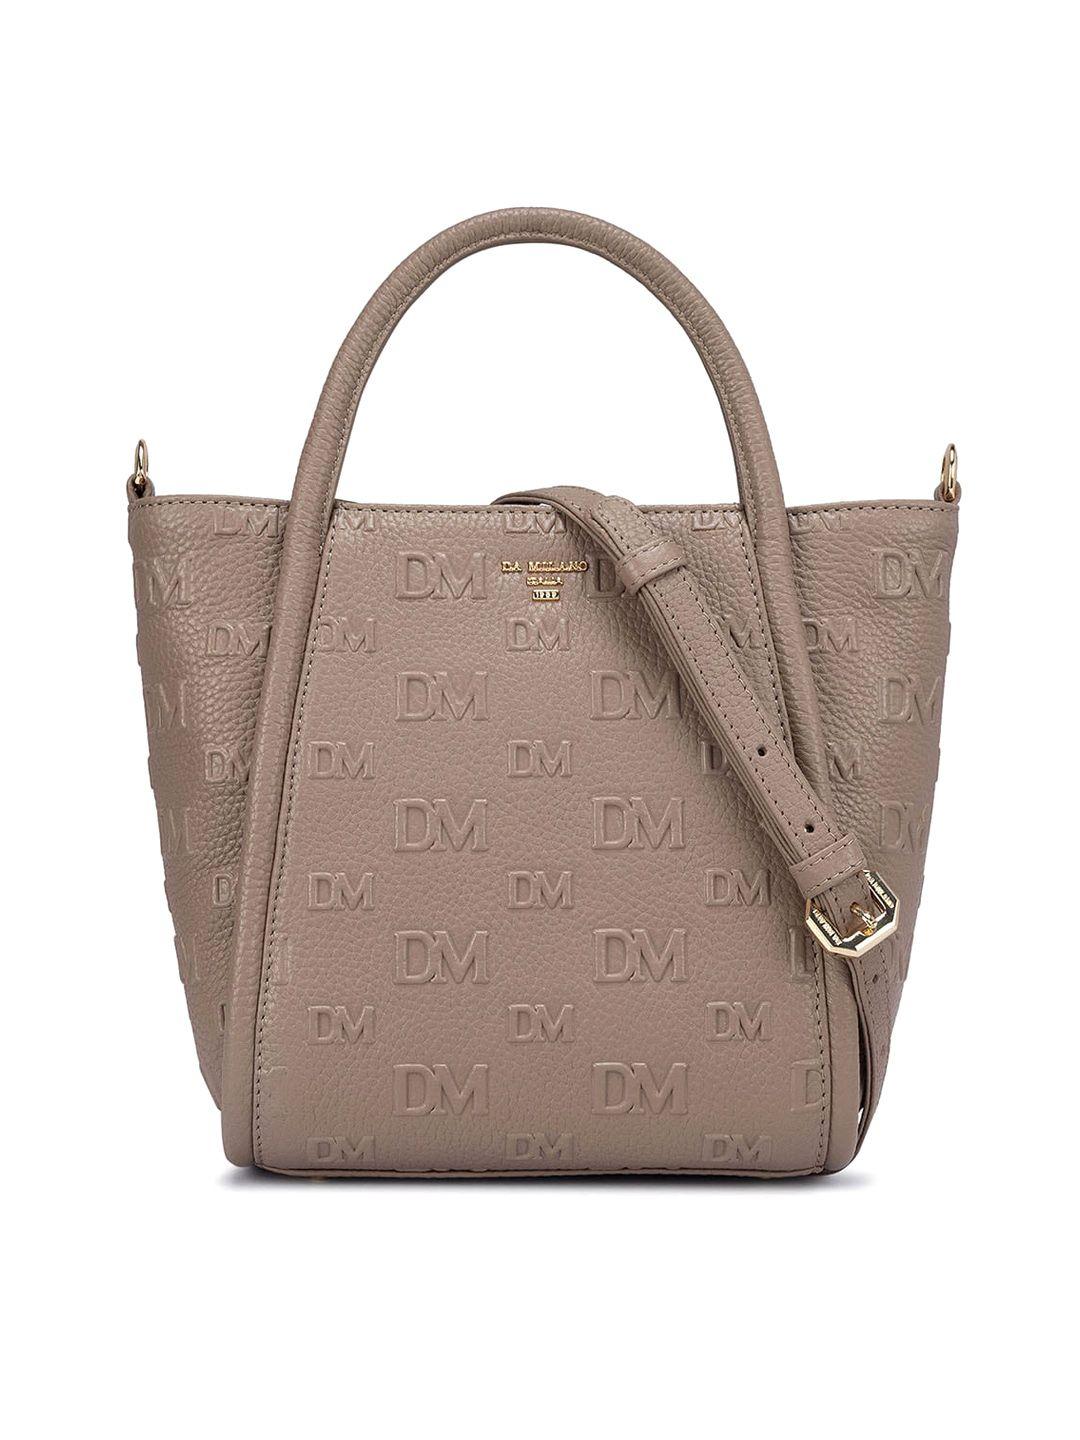 da milano embellished leather oversized shopper tote bag with cut work